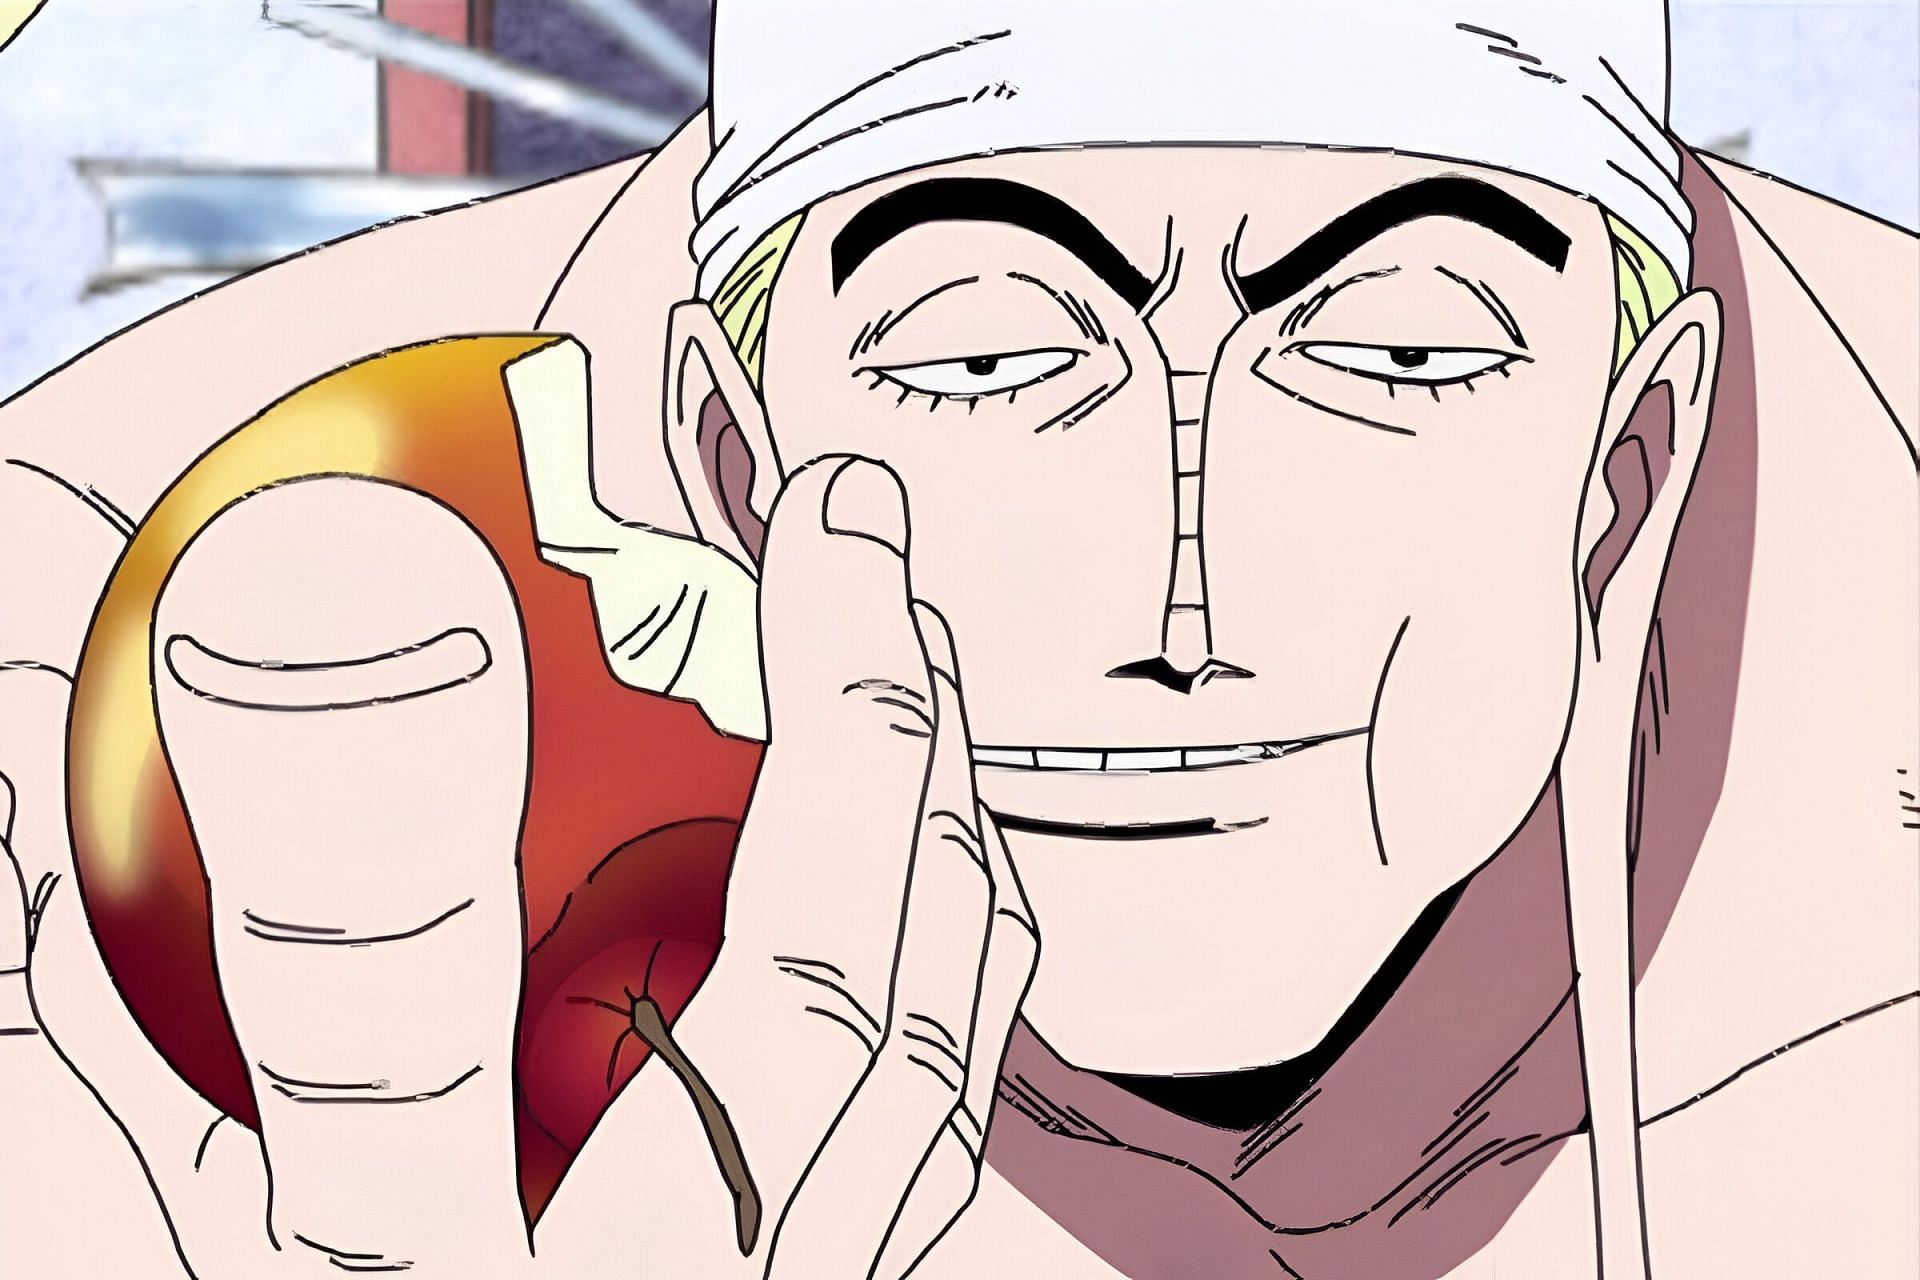 Enel as seen in the anime (Image via Toei Animation)